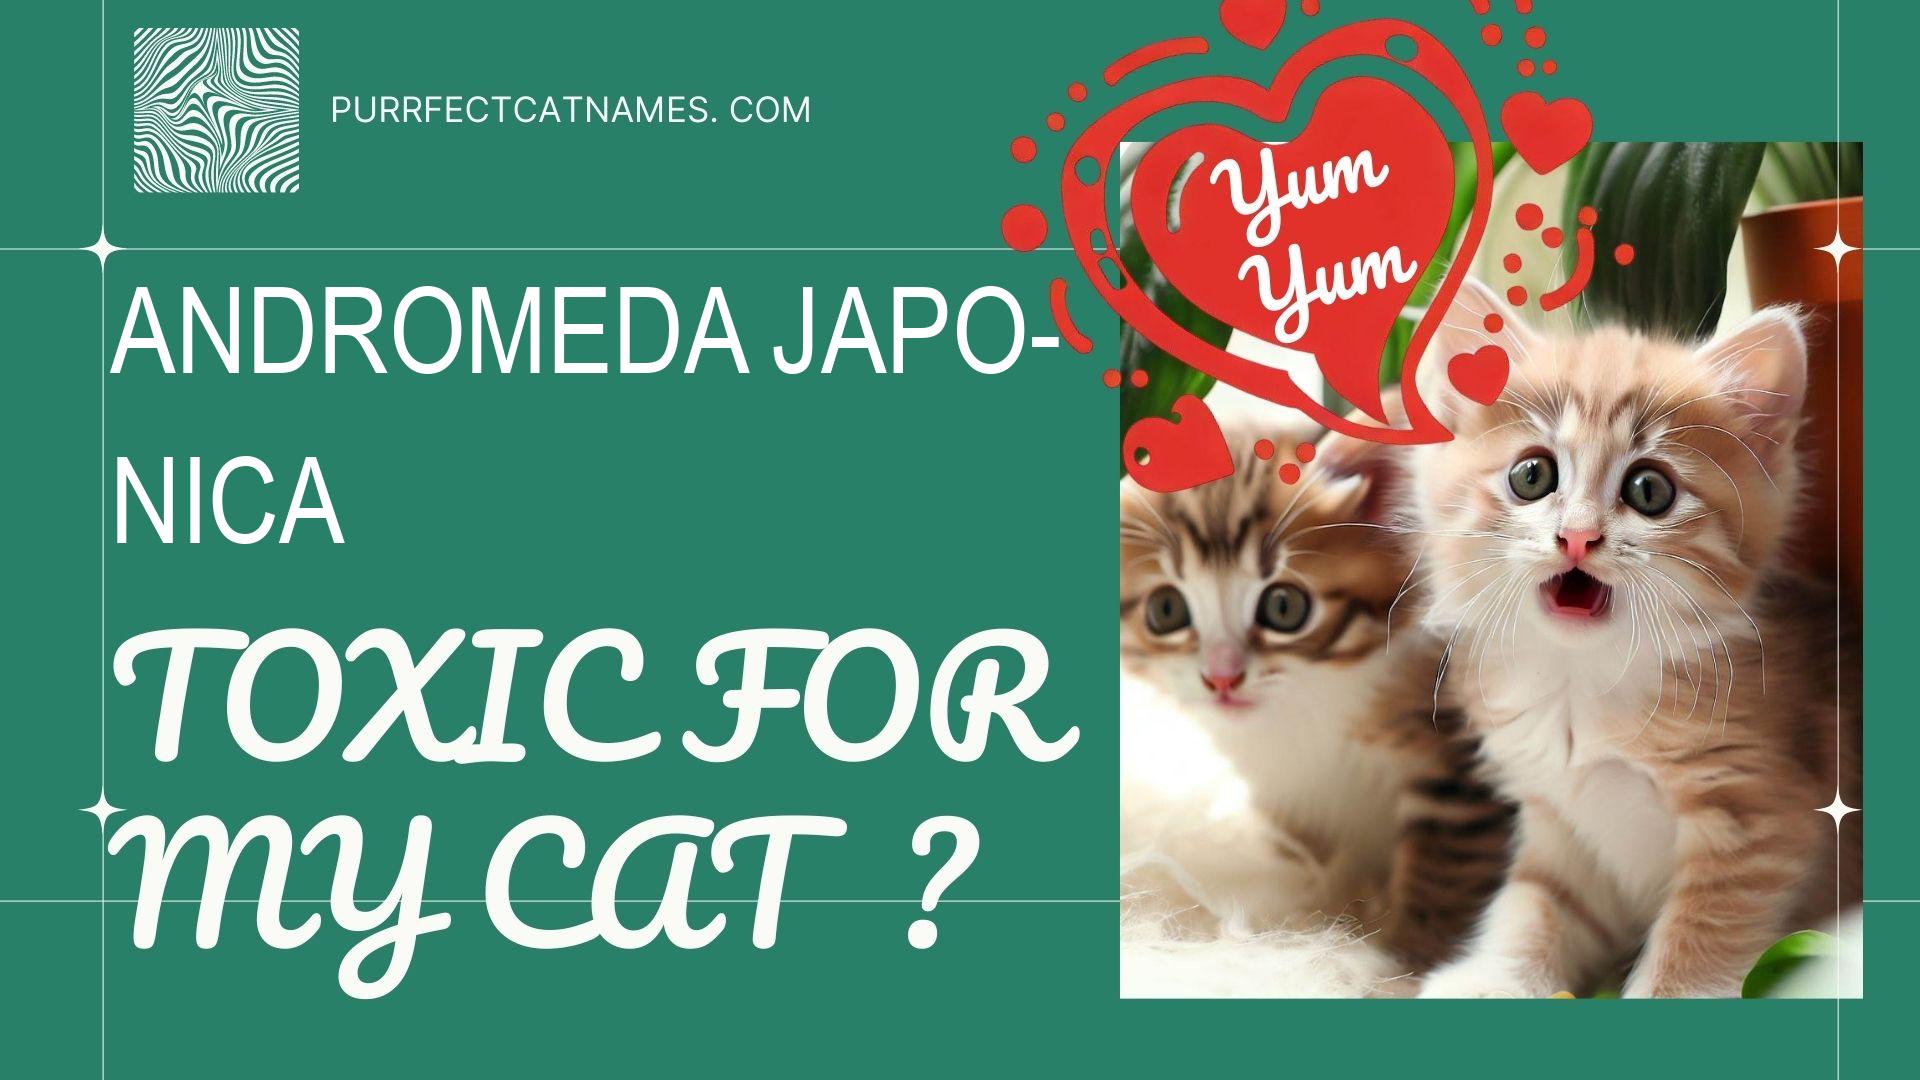 IsAndromeda Japonica plant toxic for your cat